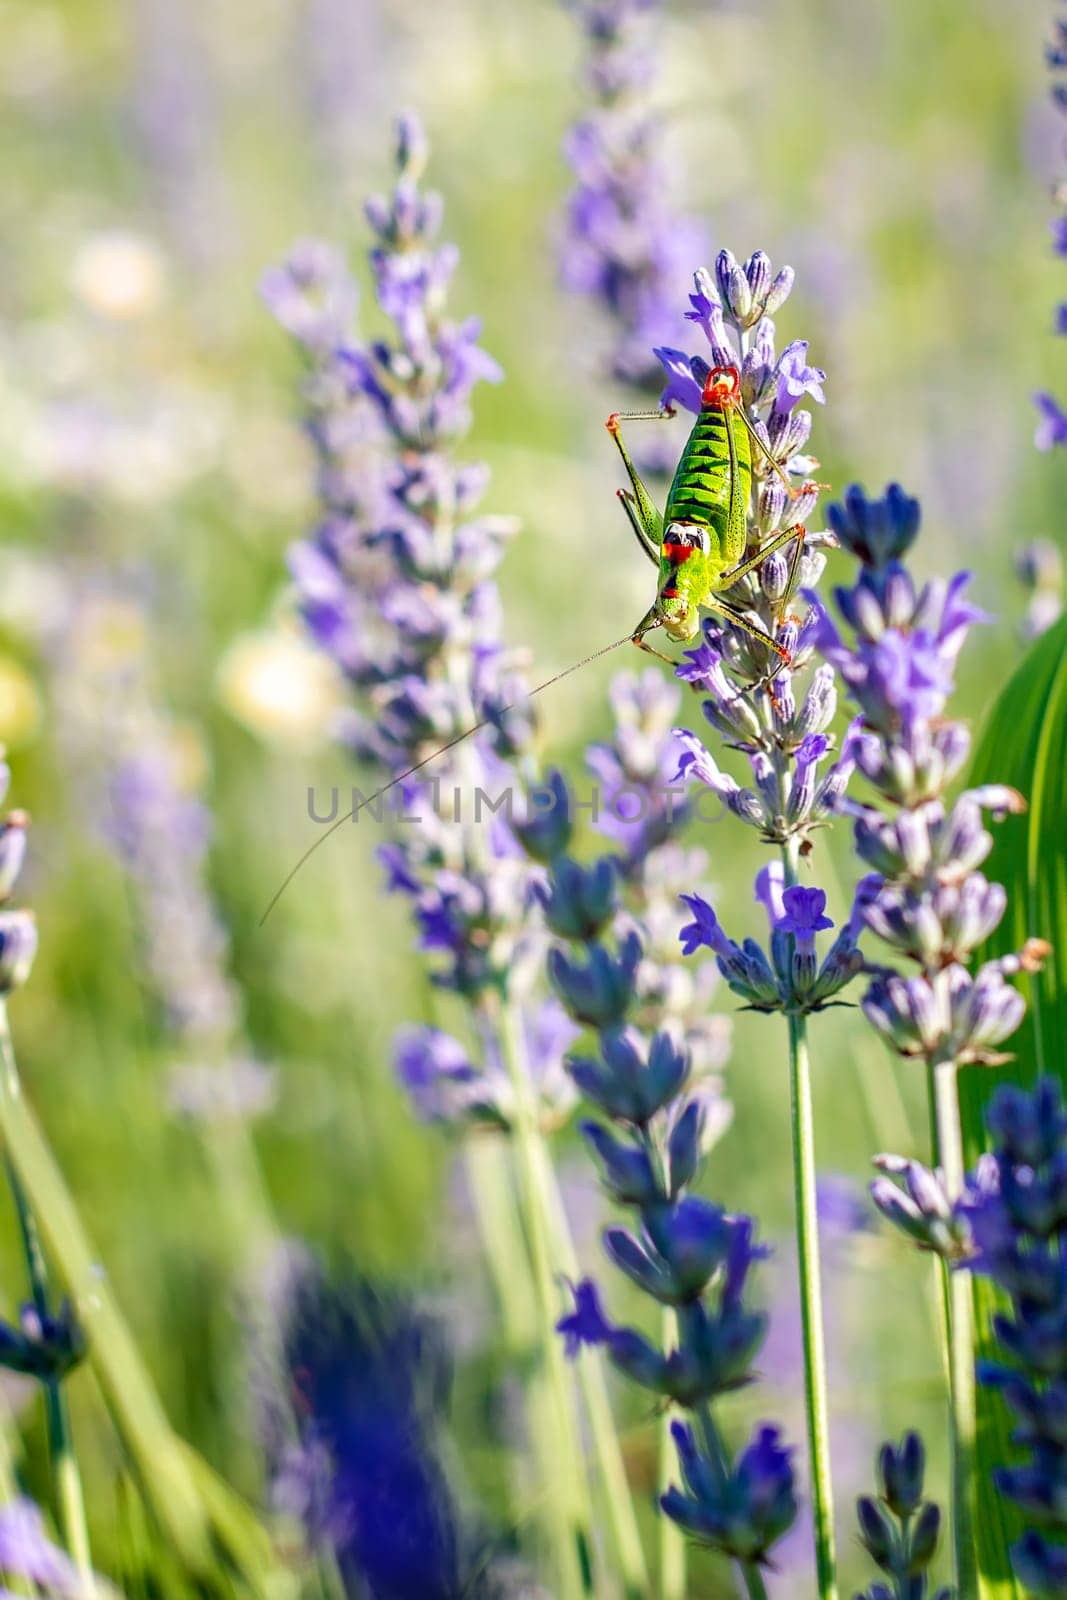  A colorful grasshopper sits on a lavender flower. by EdVal